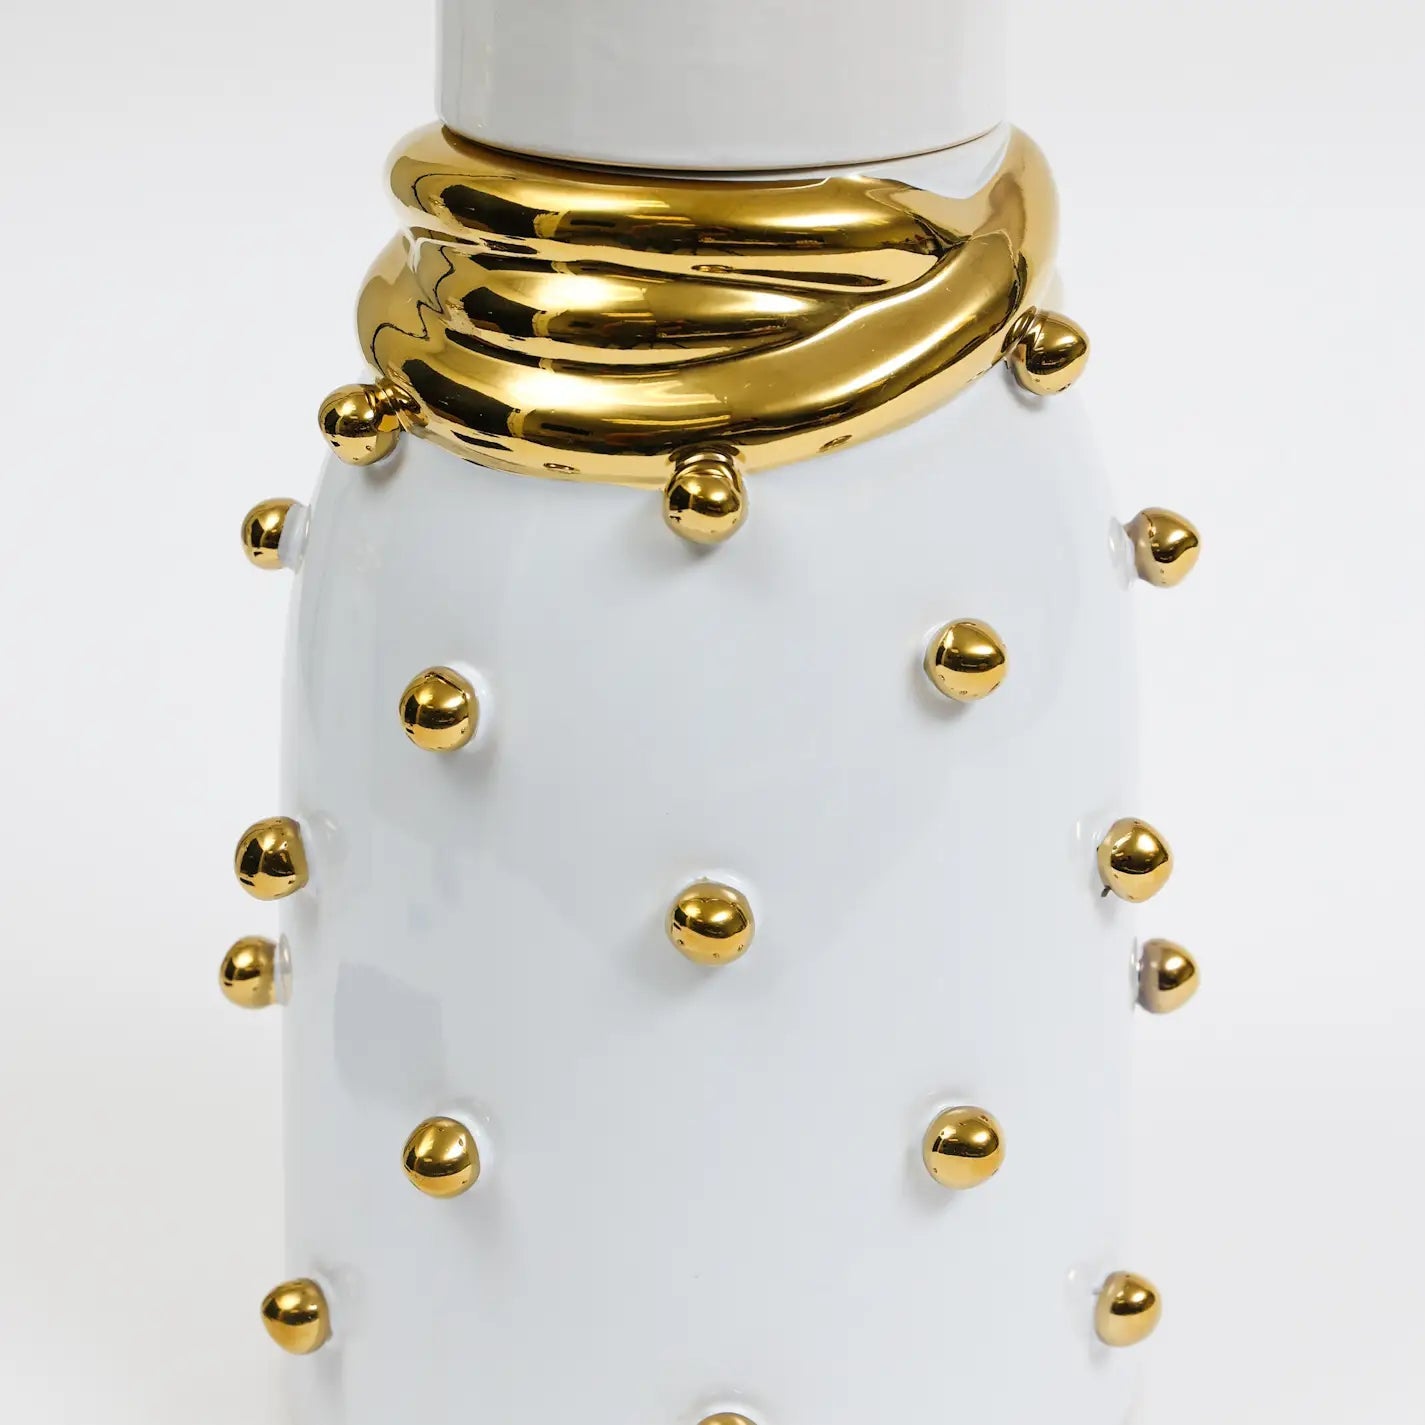 White Ceramic Jar with Gold Elegant Detail and Studded Decorative Jars High Class Touch - Home Decor Large 